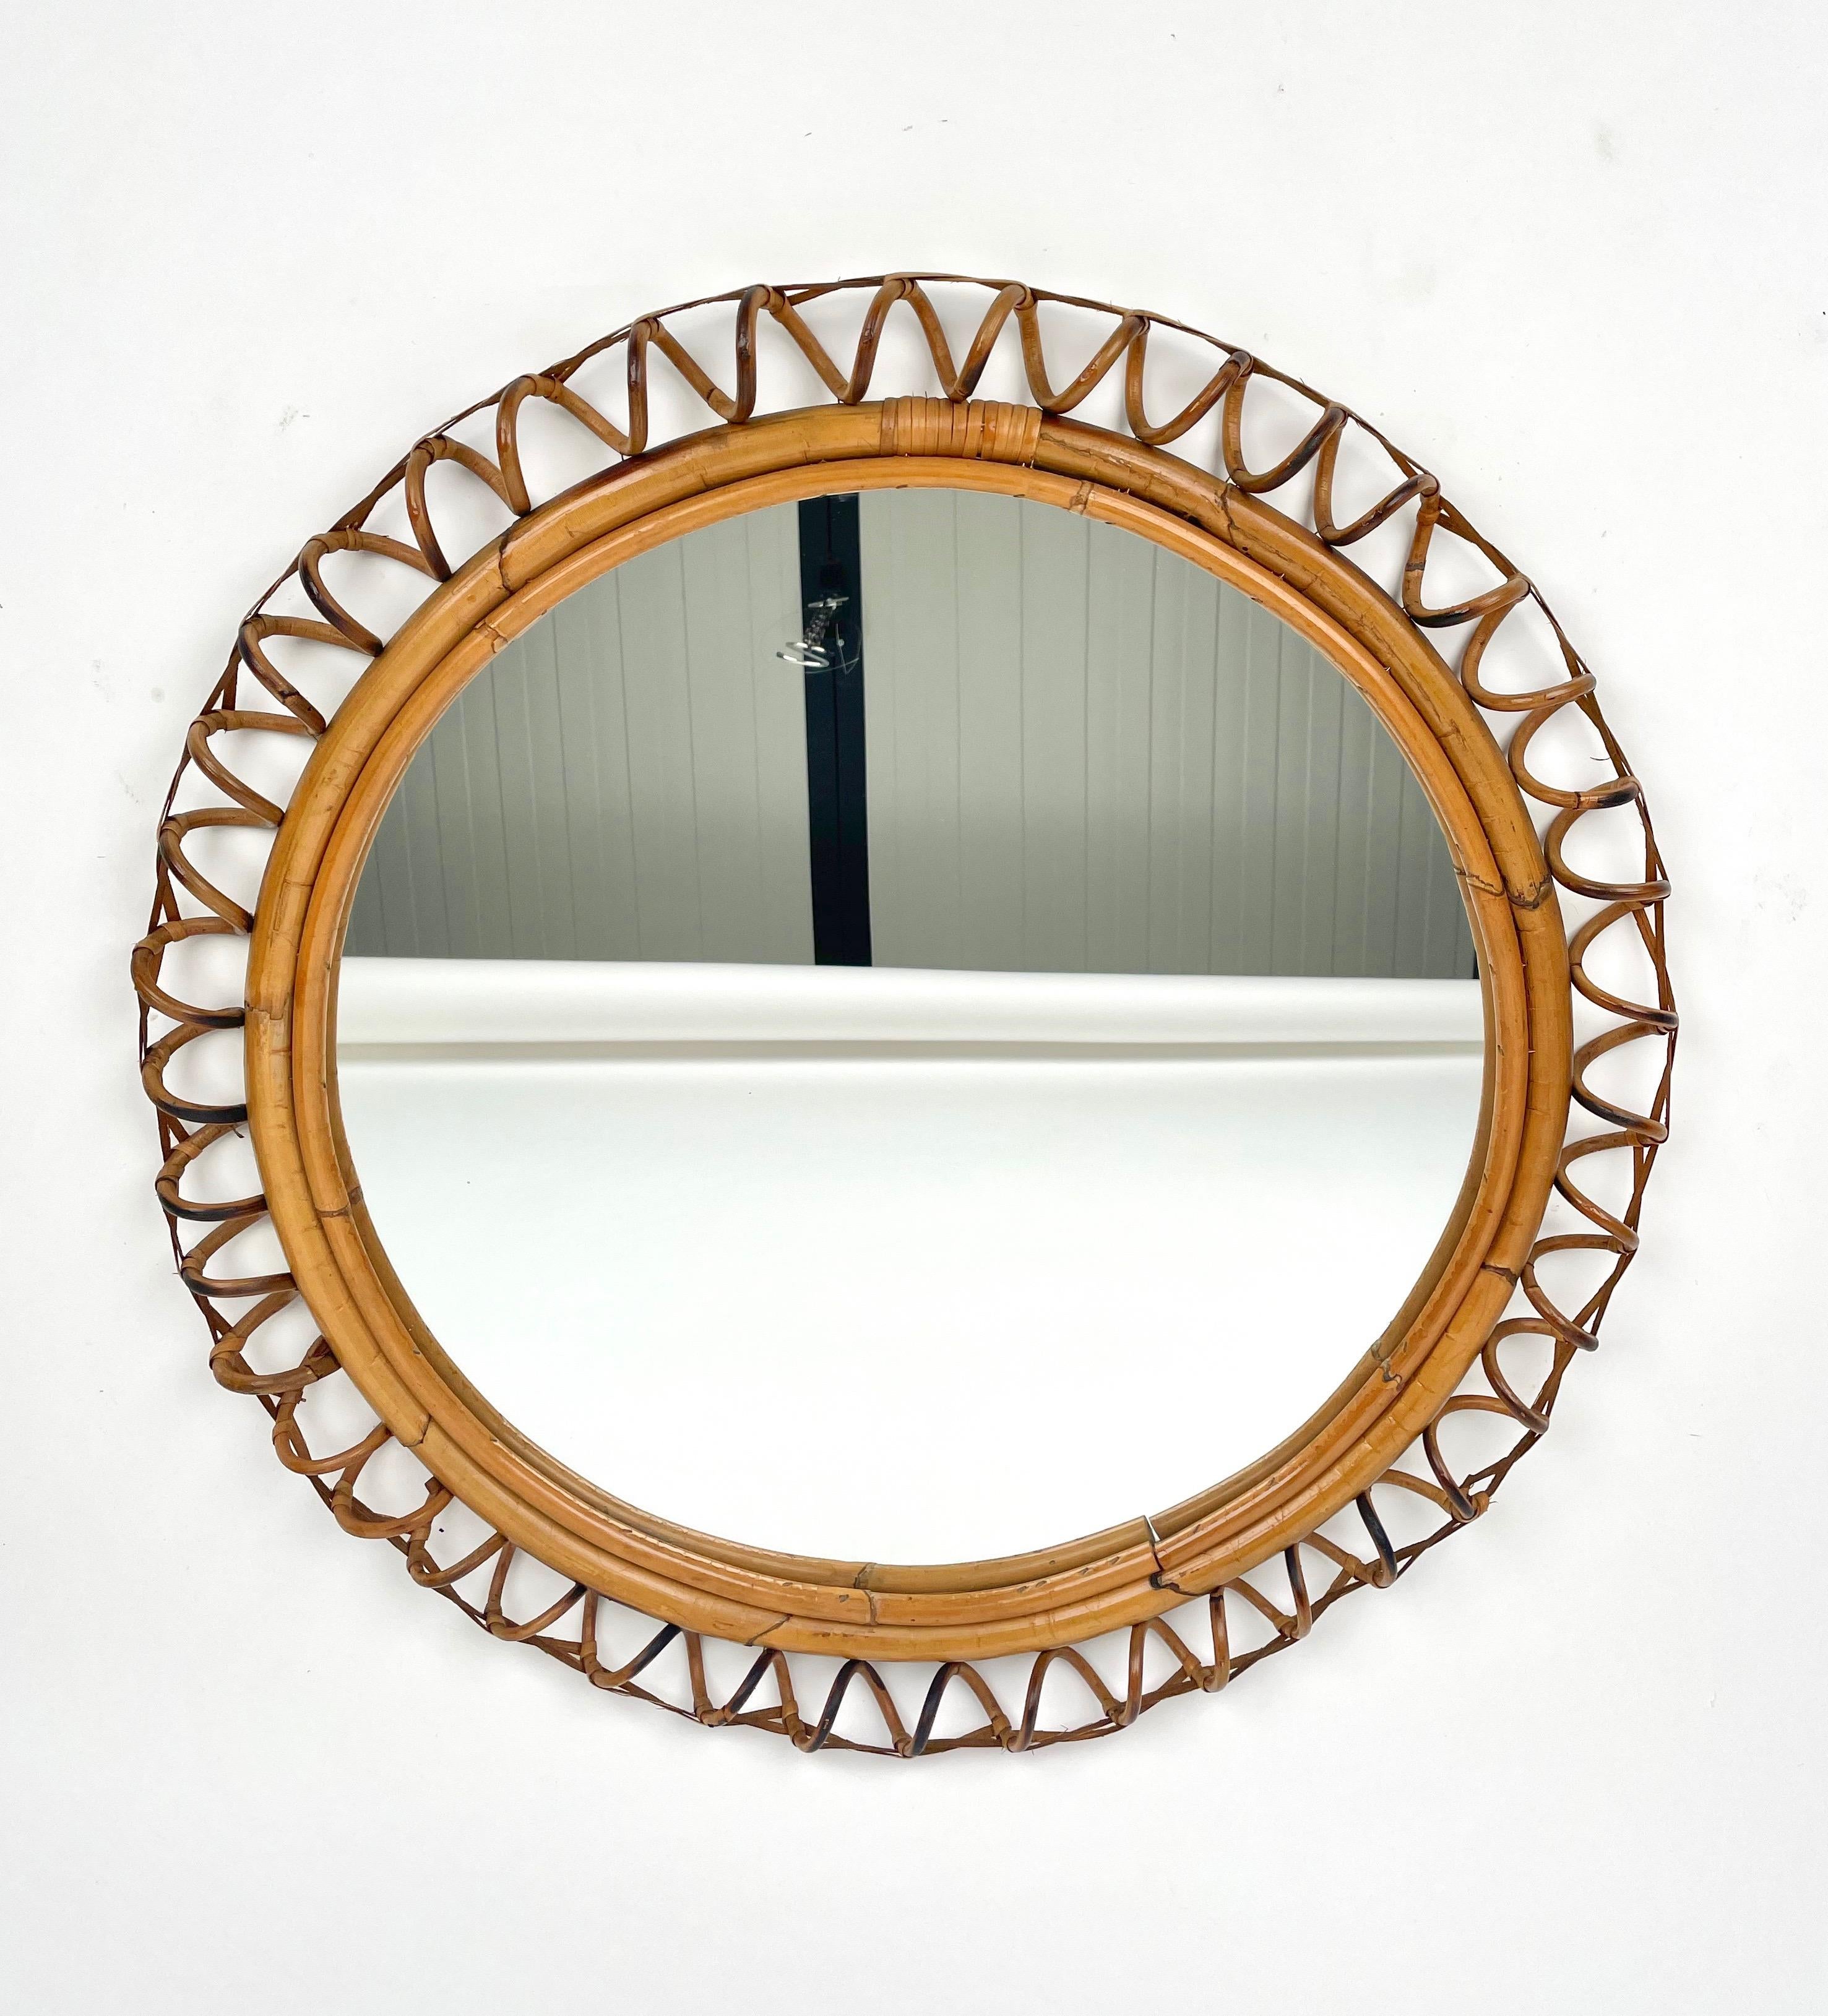 1960s Italian round wall mirror in rattan and bamboo. The rattan is woven as an elegant spiral surrounded by a rattan strip and the mirror is framed by two bamboo pieces.